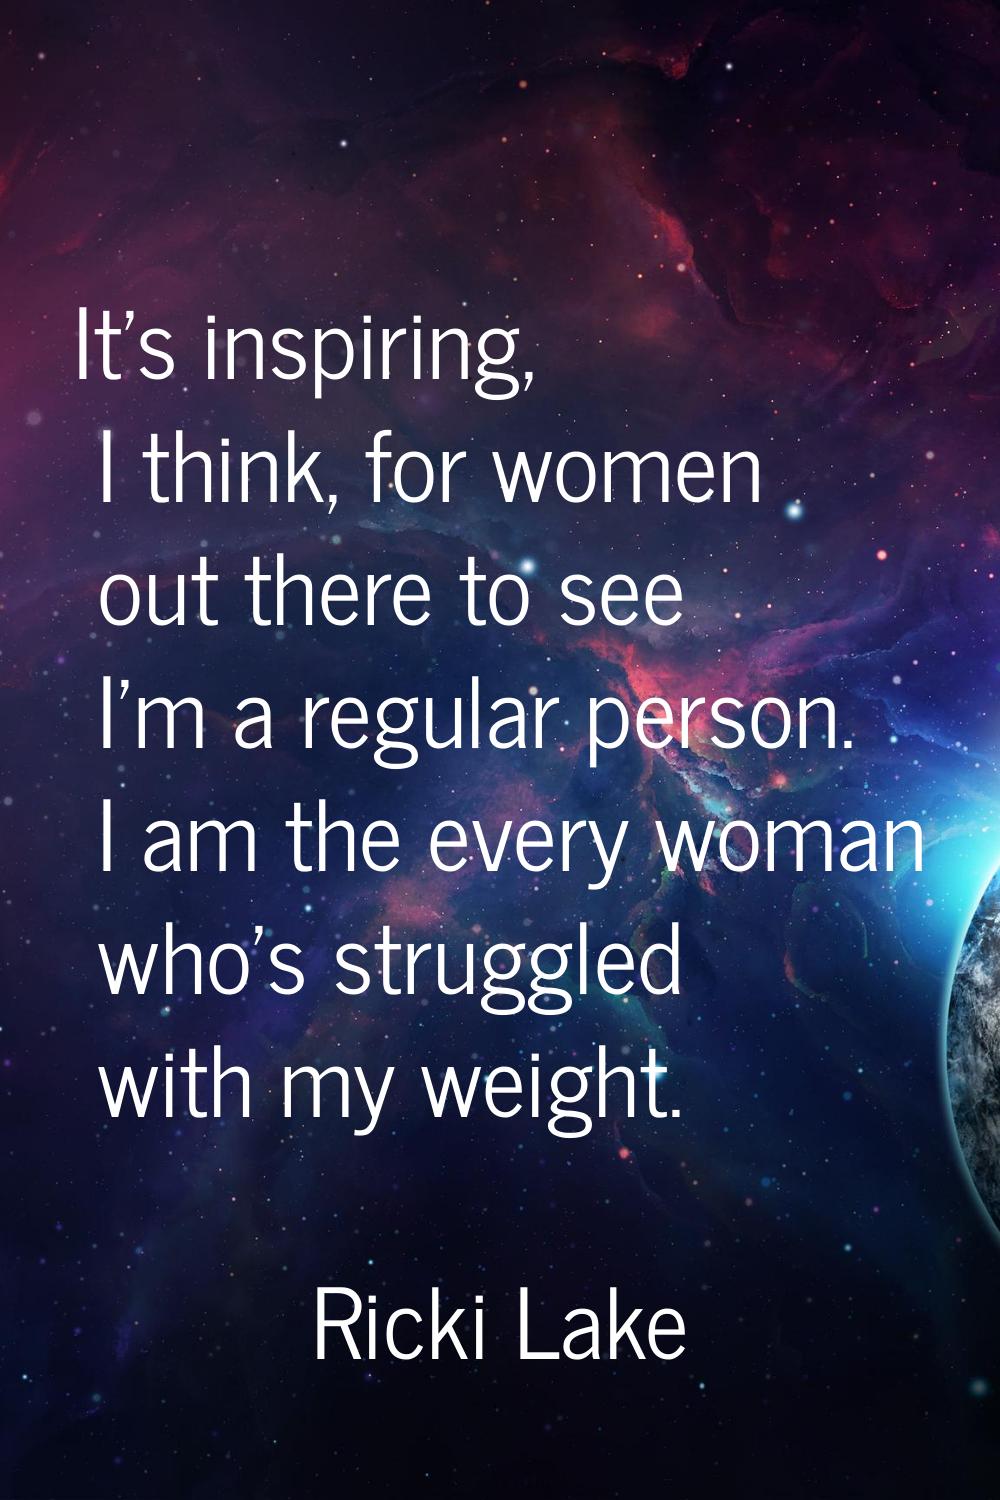 It's inspiring, I think, for women out there to see I'm a regular person. I am the every woman who'